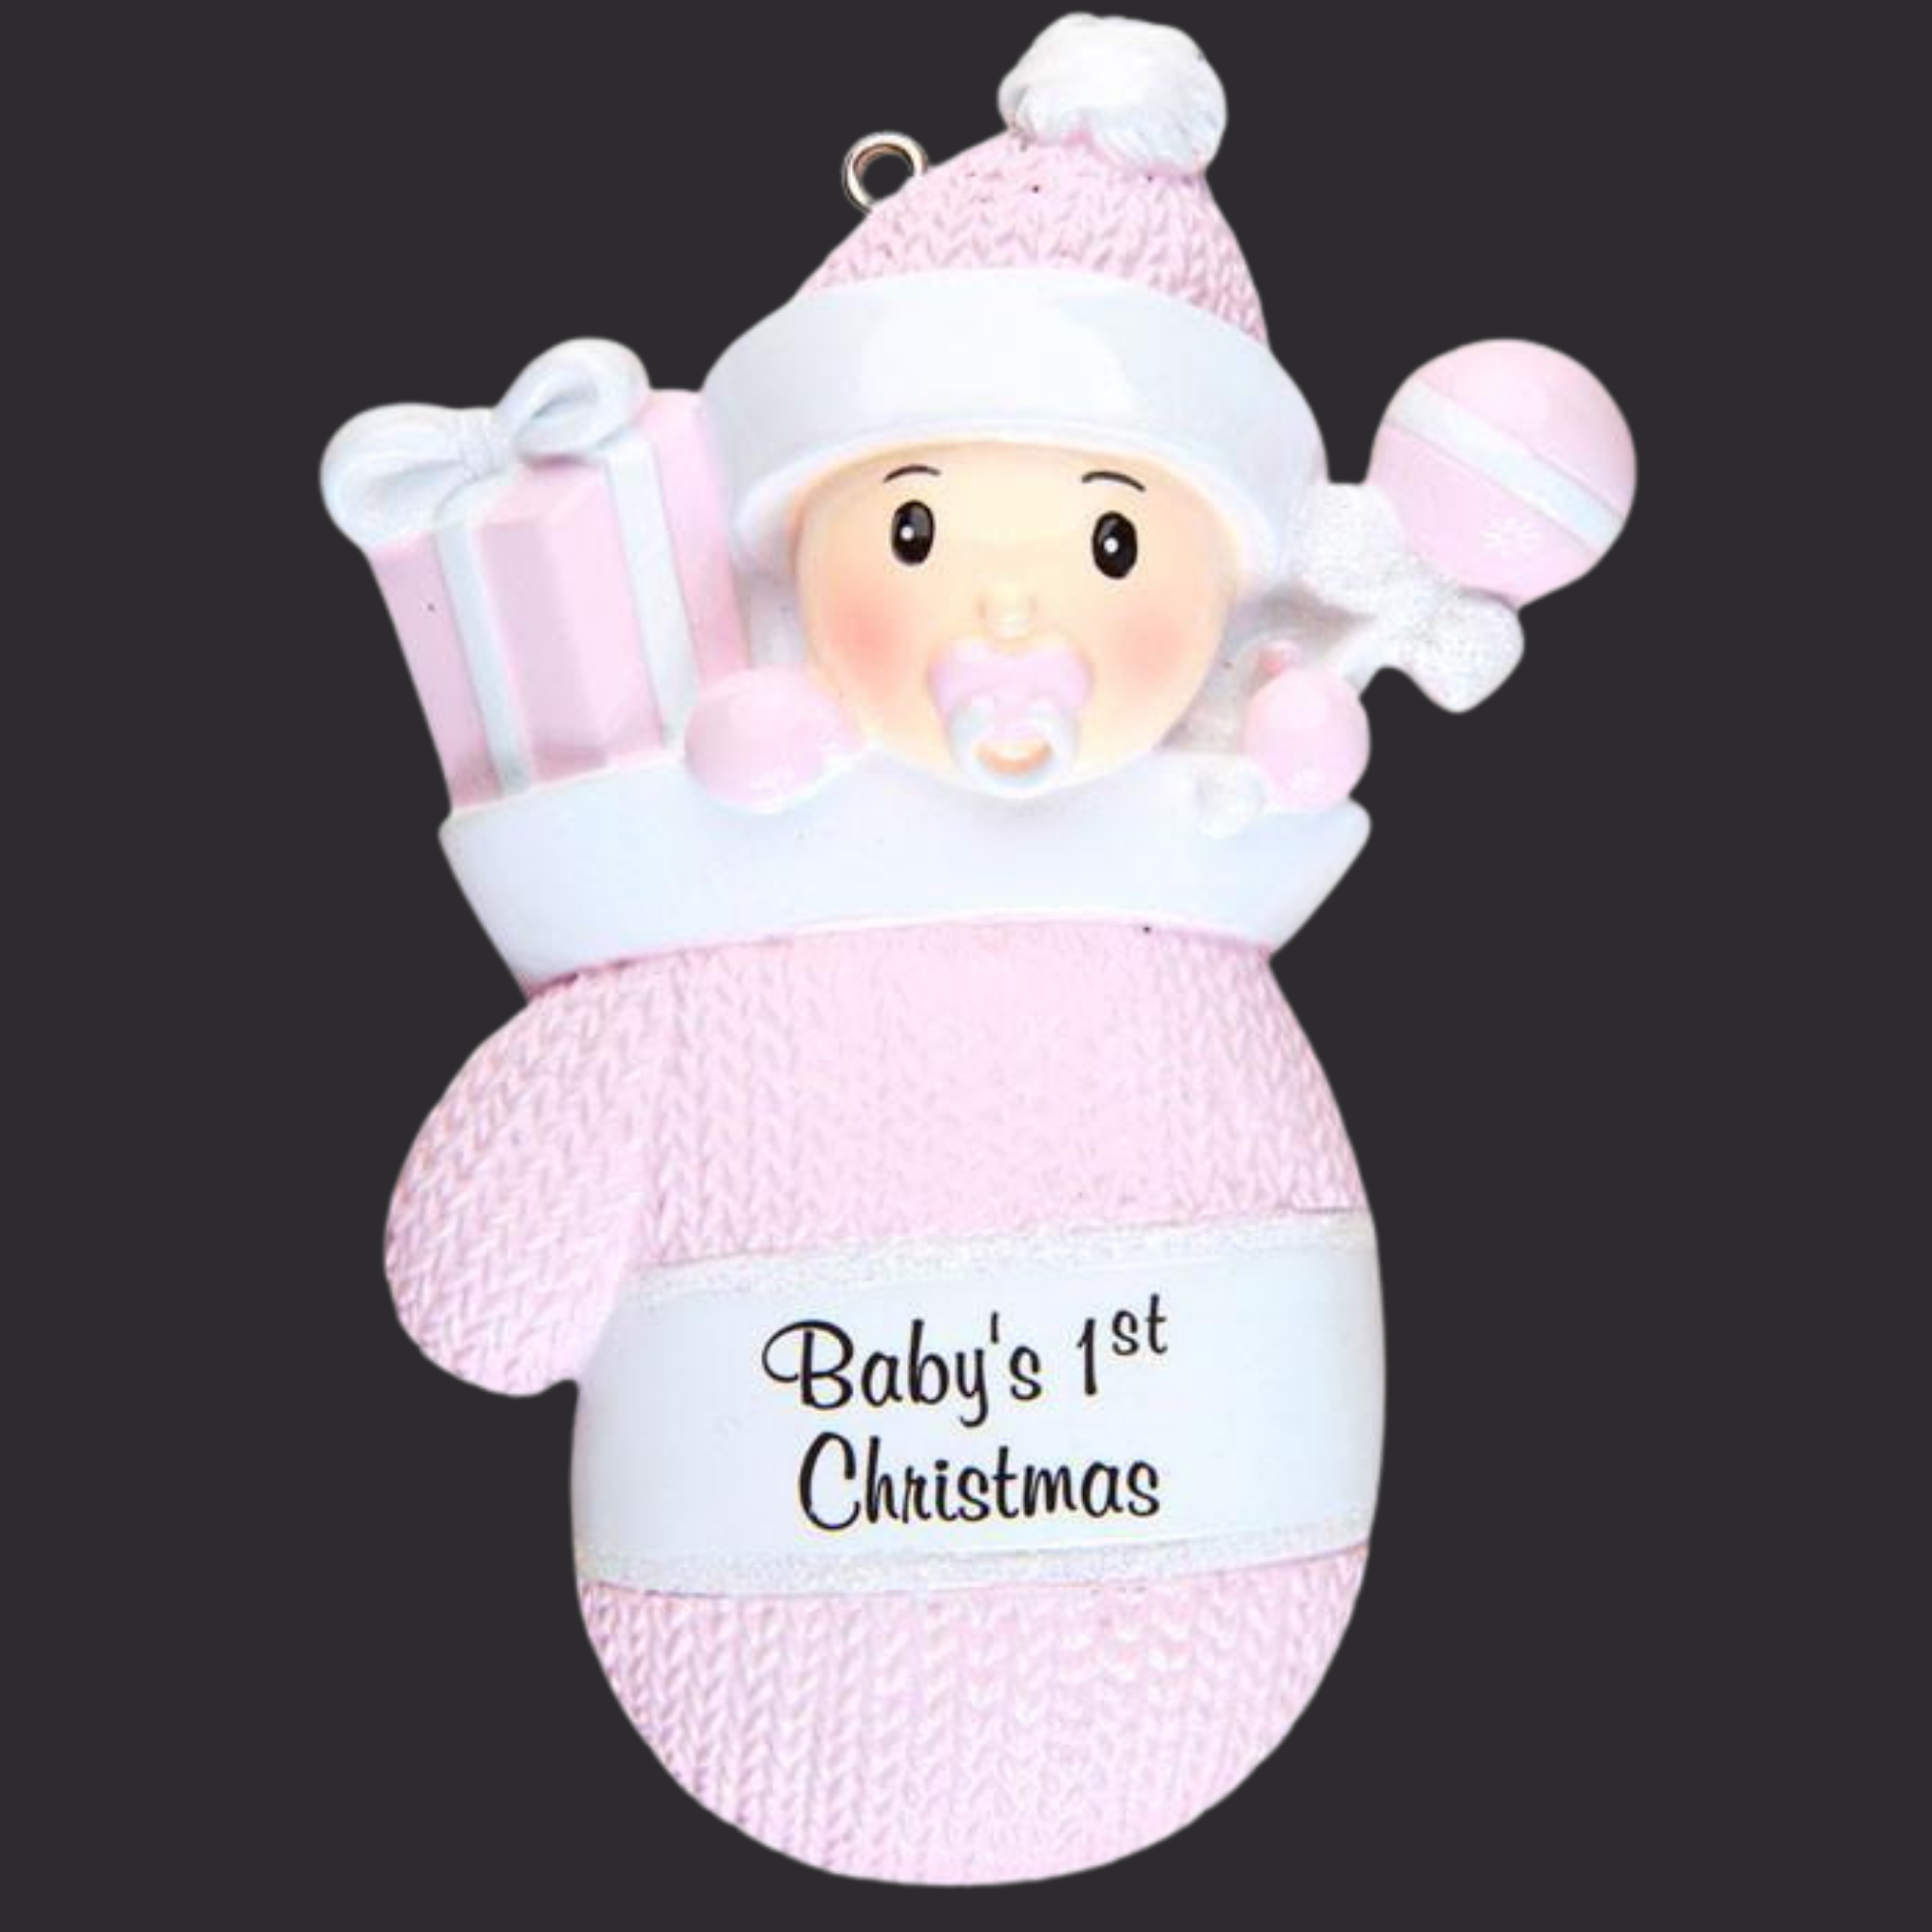 personalised Baby's 1st Christmas tree decoration